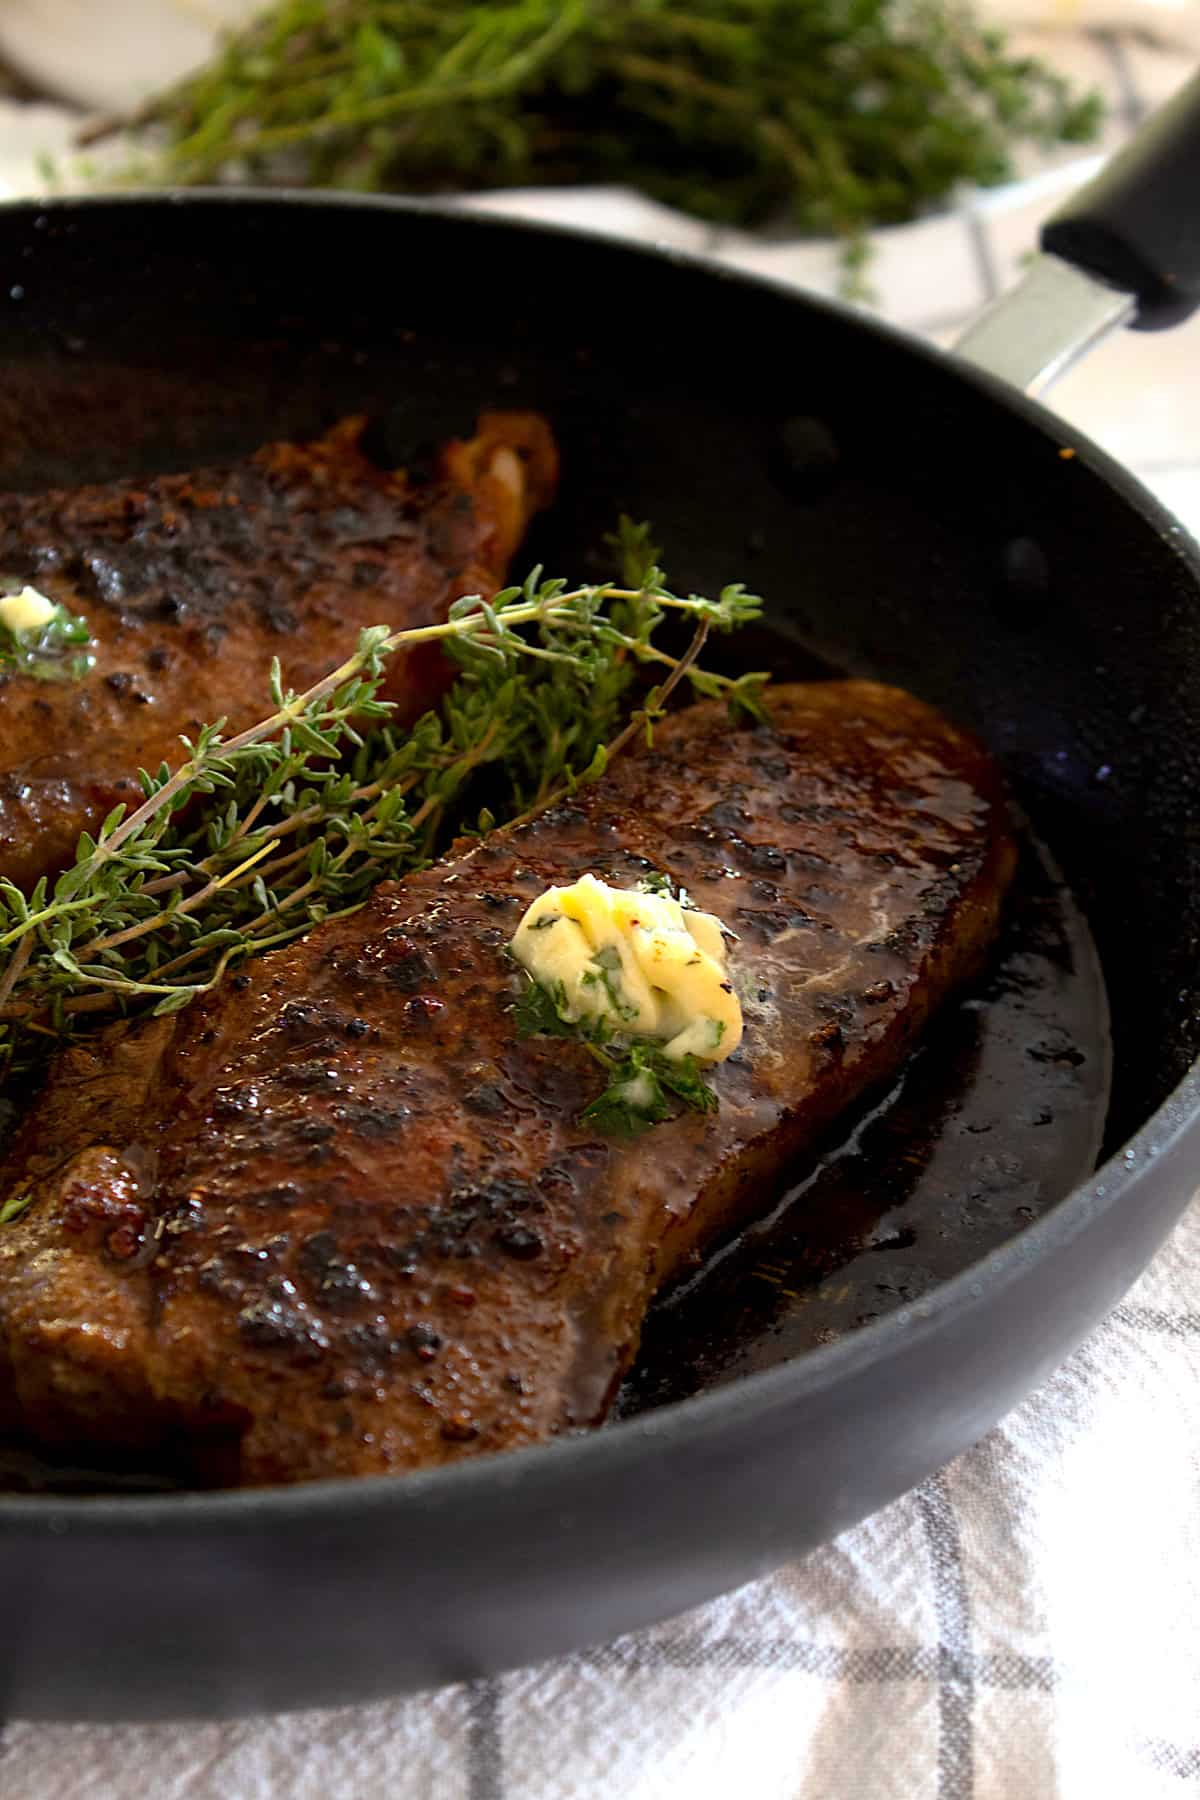 How to Cook Steak Perfectly in a Pan - Laughing Spatula